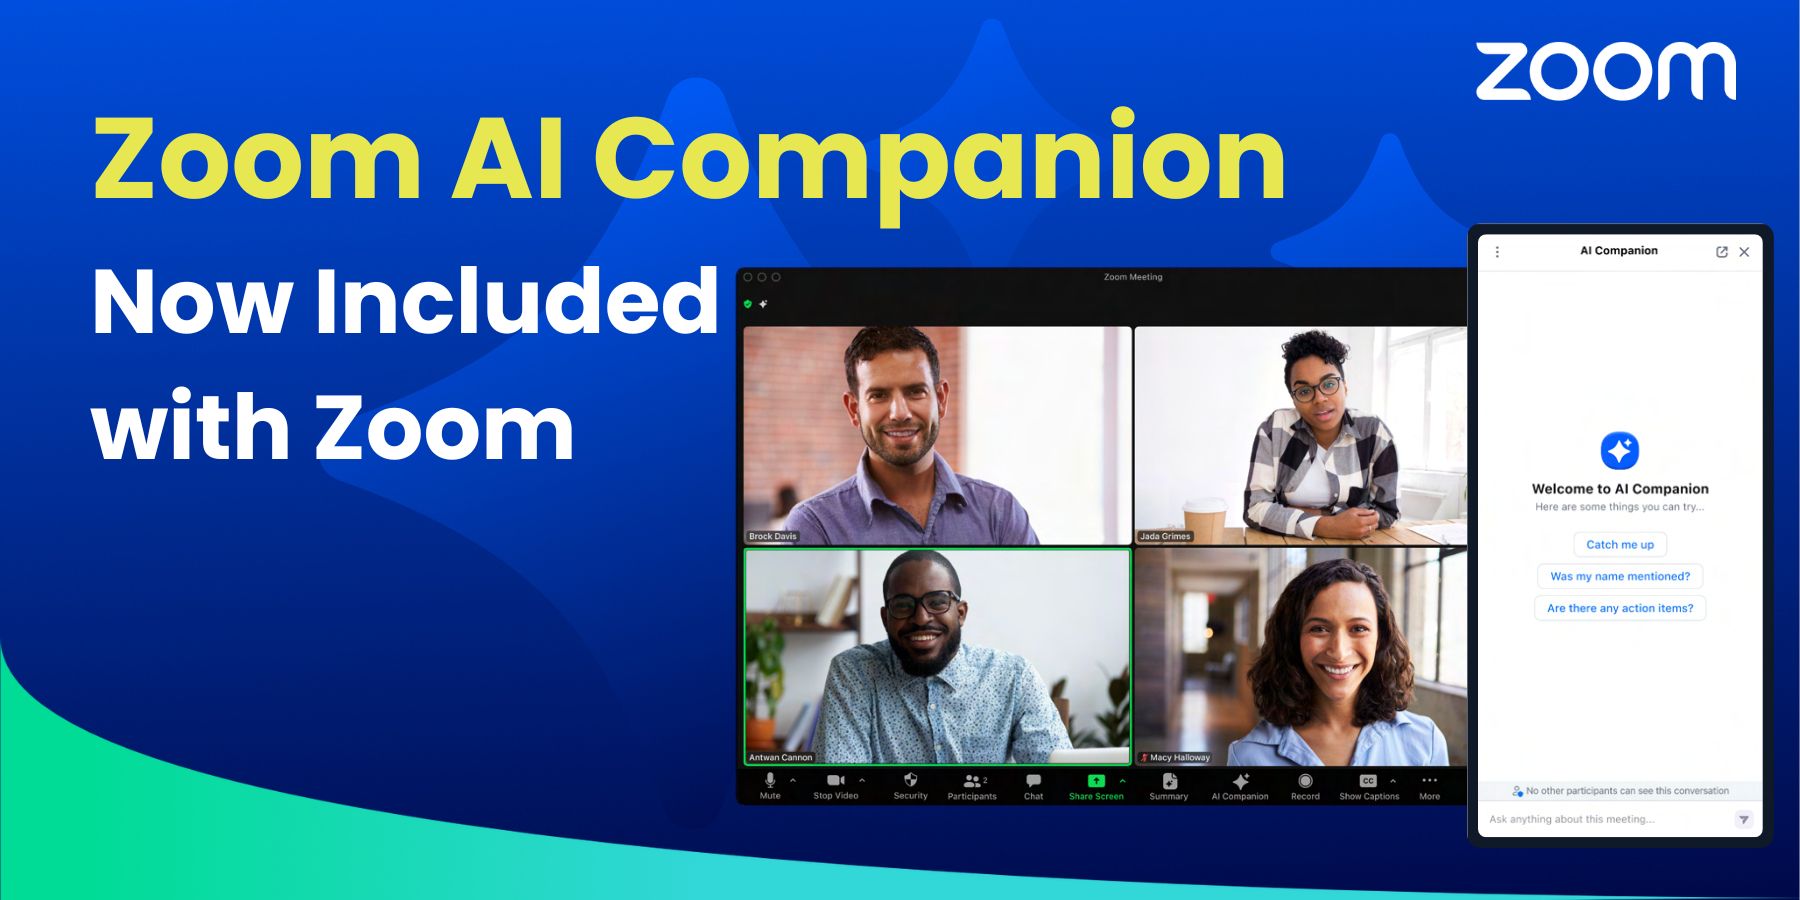 Featured image for “Zoom AI Companion: Now Included with Zoom”